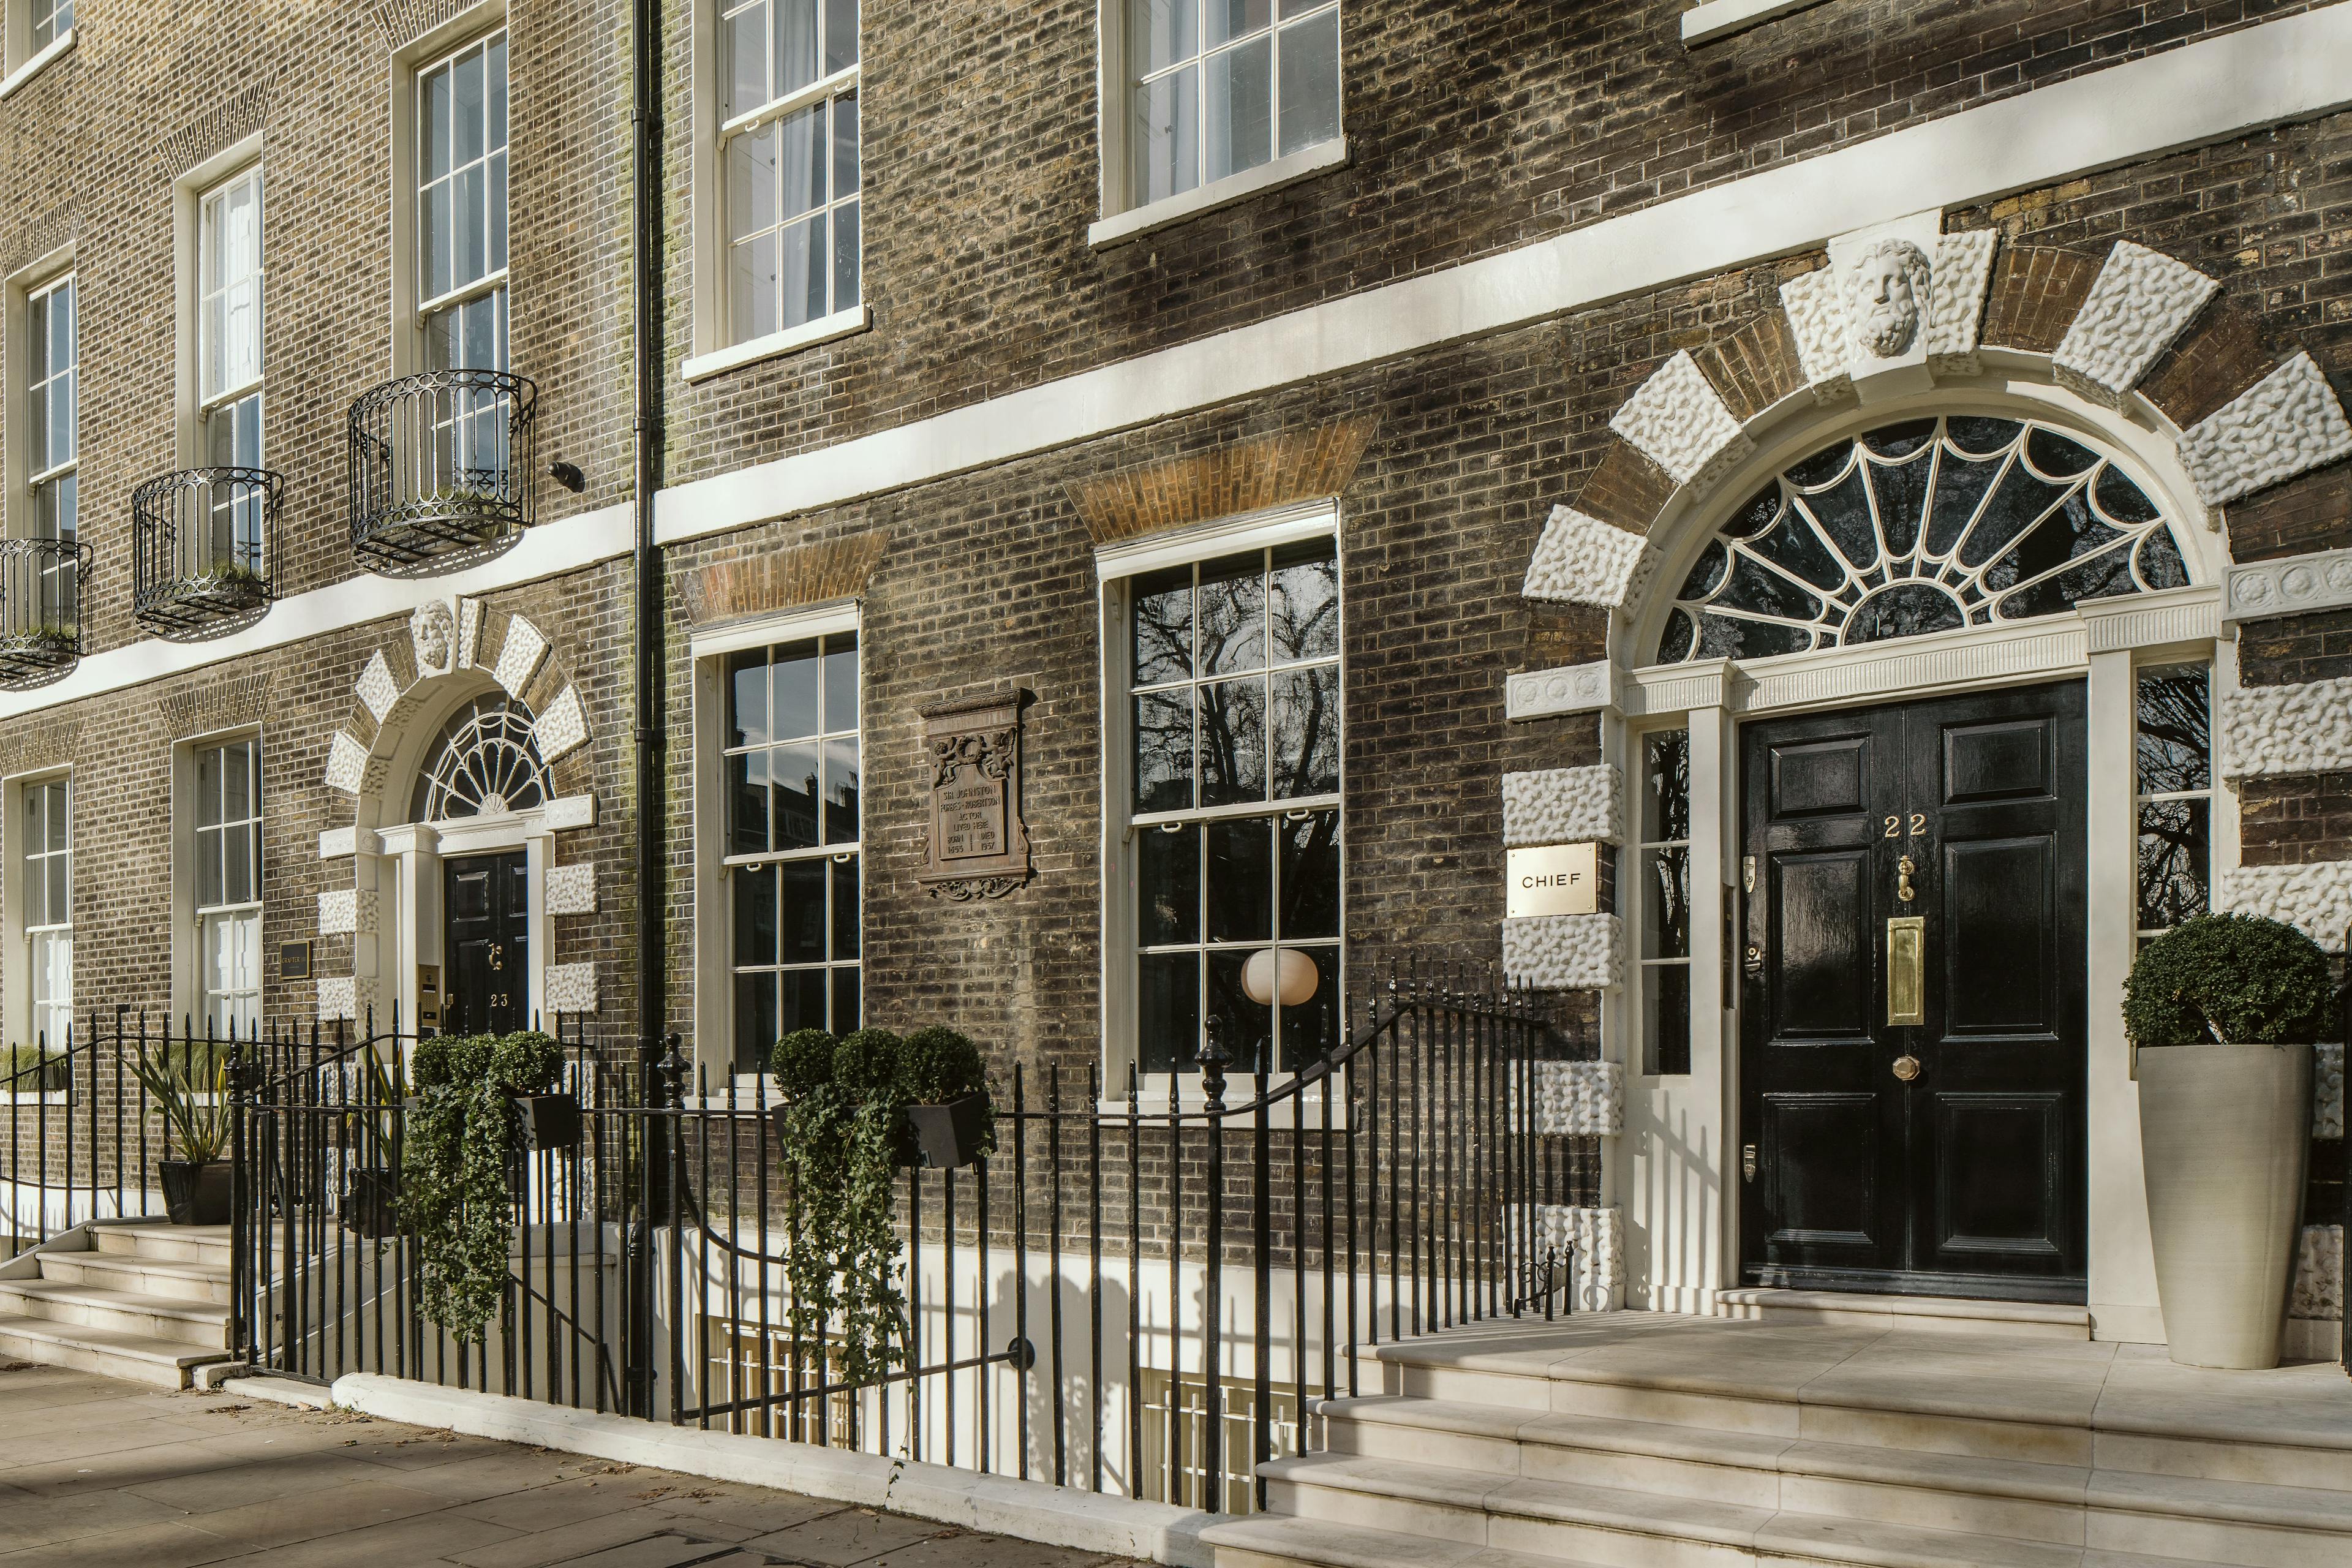 The outdoor brick facade of the Chief London clubhouse, featuring a gold sign inscribed with "CHIEF" and black door with a gold "22" on it.